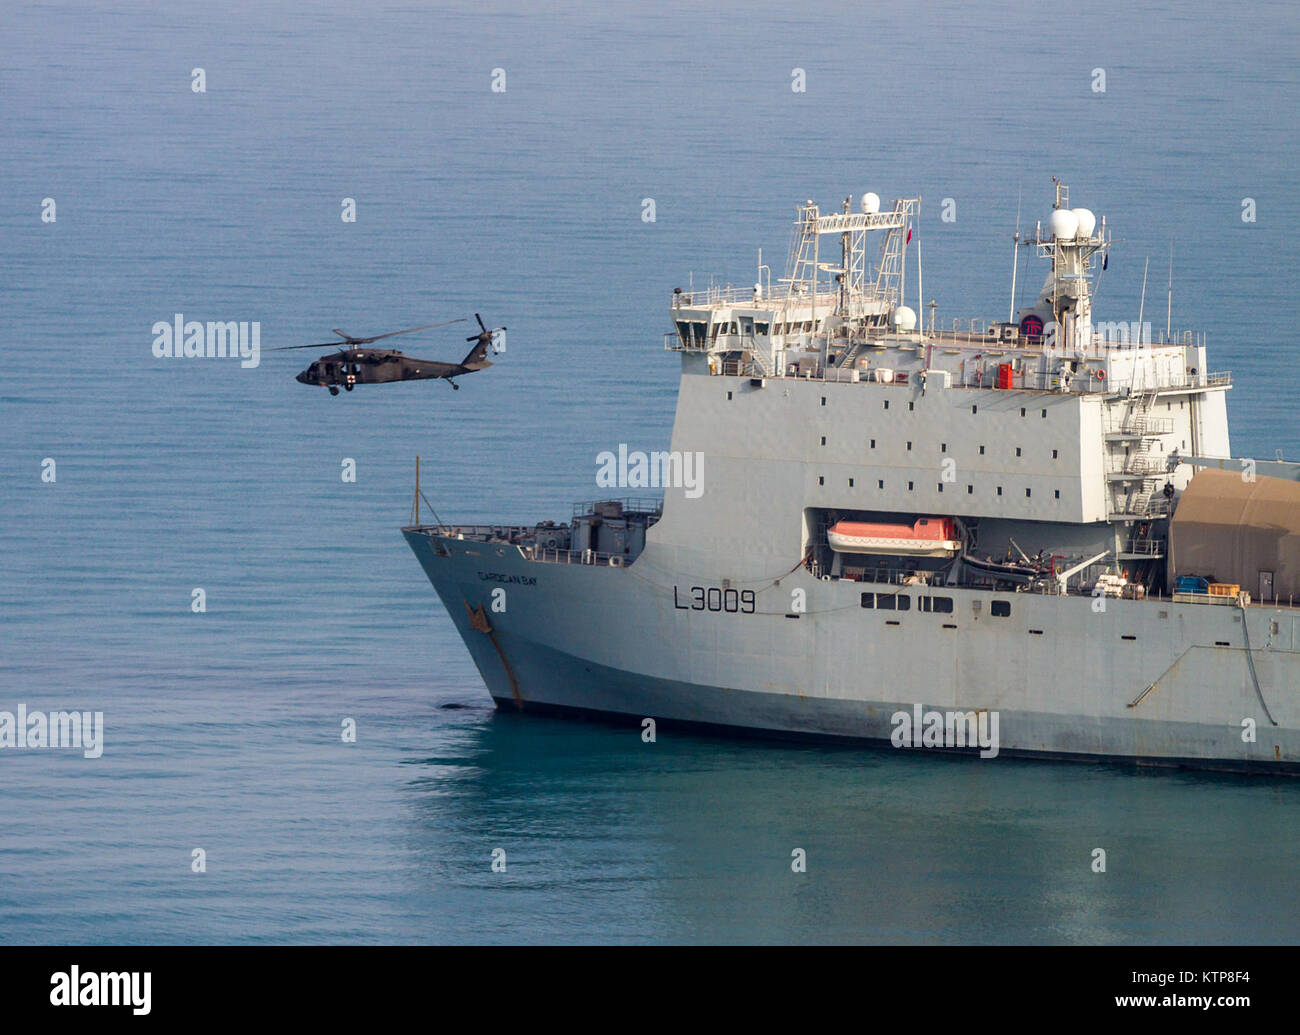 A UH-60 Medical Evacuation Black Hawk flown by pilots from 1st Battalion, 214th Air Ambulance, 42nd Combat Aviation Brigade (CAB), U.S. Army,flies past the RFA Cardigan Bay, Royal Fleet Auxiliary, U.K. Royal Navy, on June 8, 2014, somewhere in the Arabian Gulf.  The pilots trained on deck landings during Exercise Spartan Kopis, an exchange between the Cardigan Bay and both the Black Hawk and AH-64 Apache elements of the 42nd CAB, New York Army National Guard.    Spartan Kopis was the first time American Apaches worked with a Royal Navy ship to function as its eyes and ears during an escalation Stock Photo